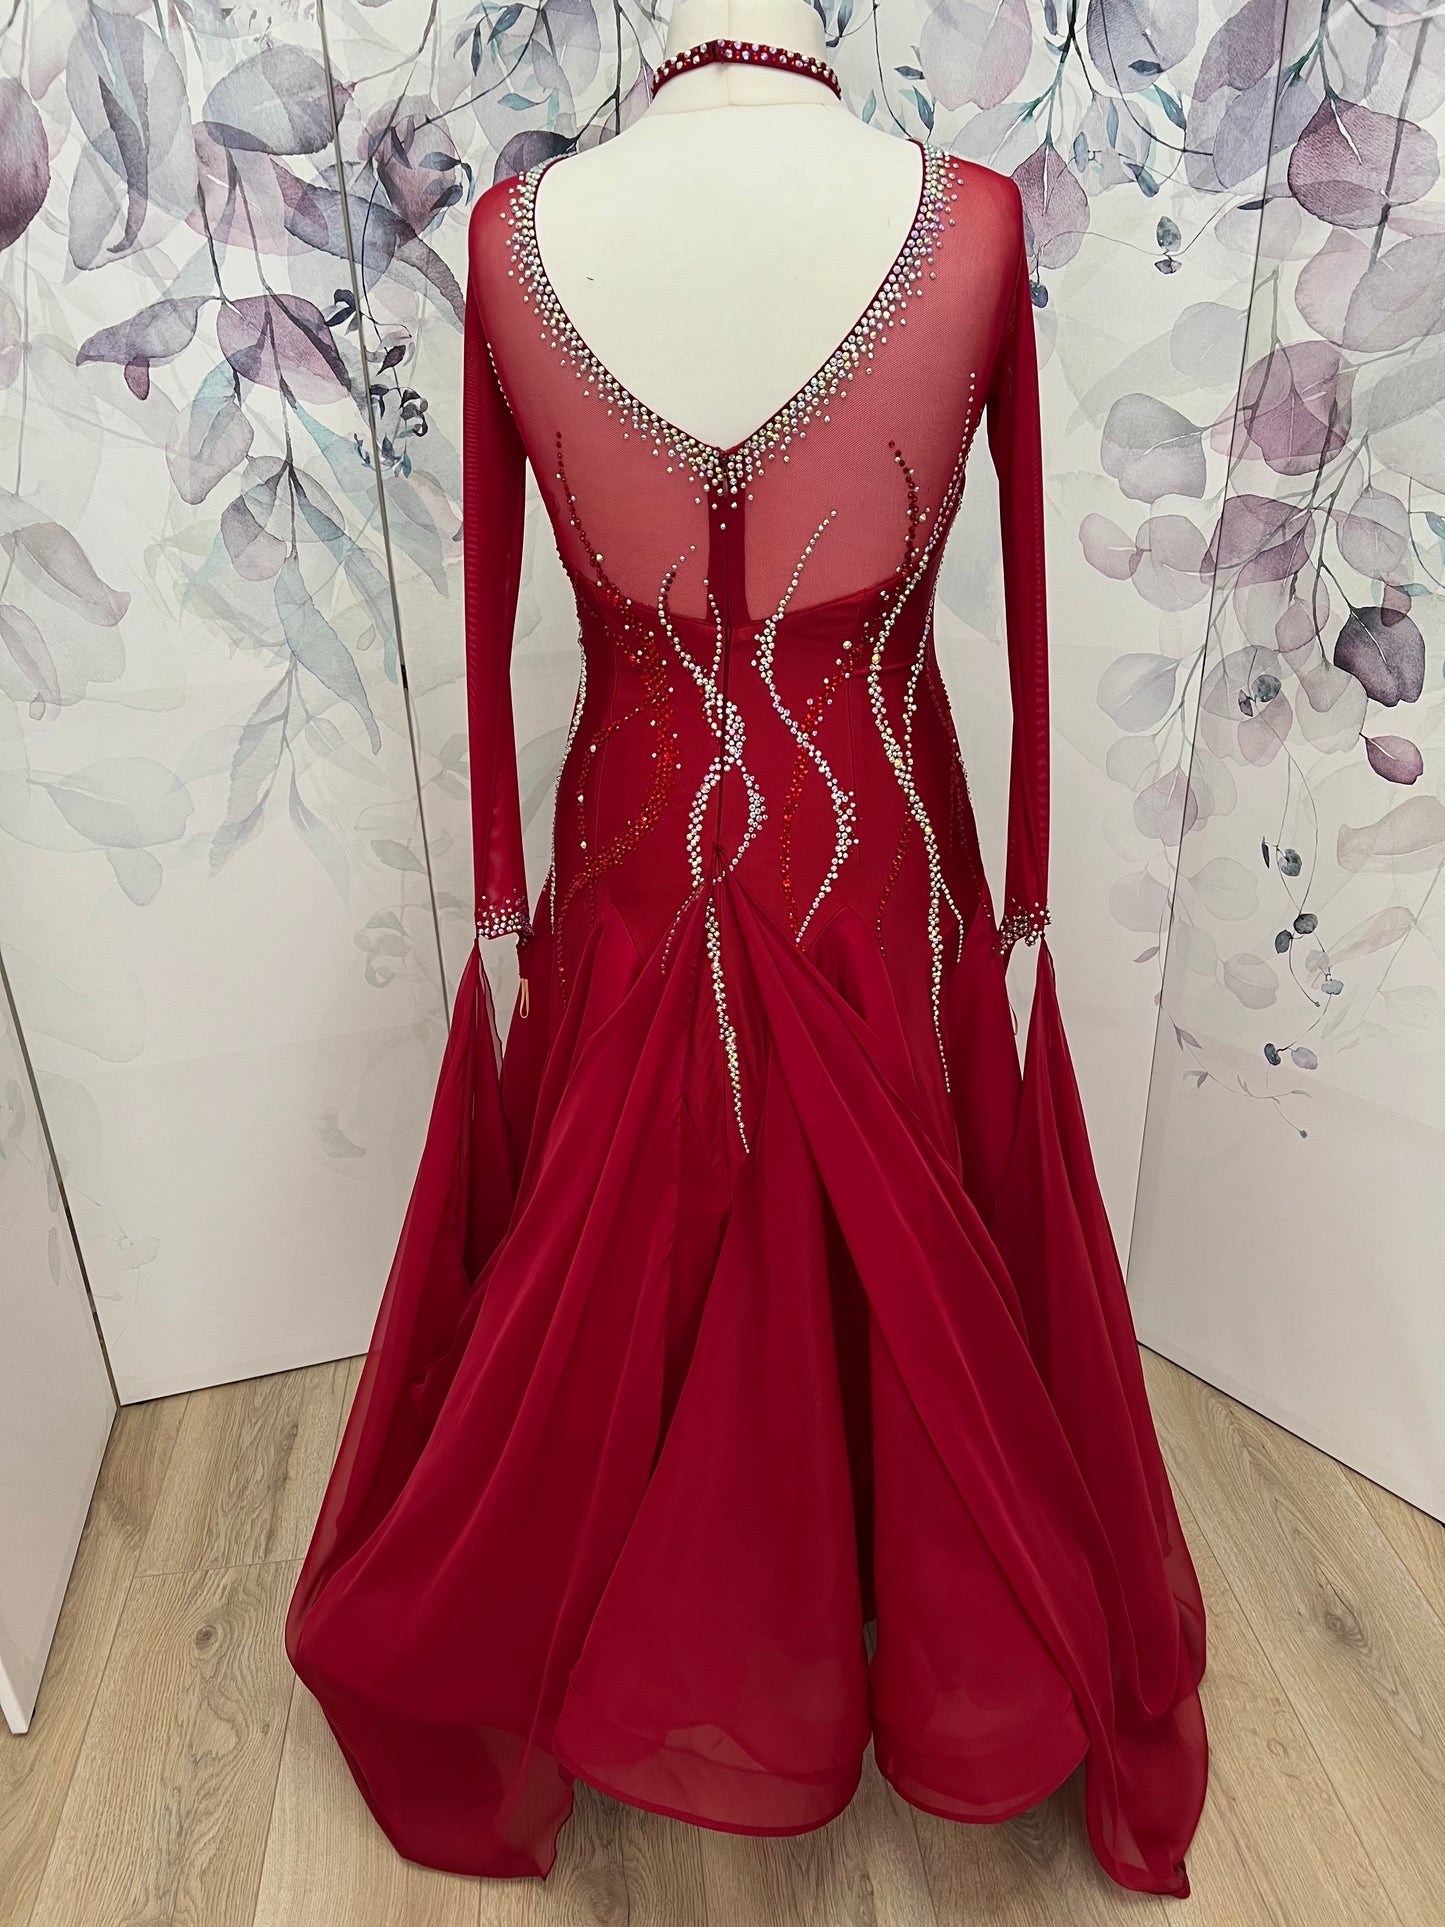 002 Red Competition Ballroom Dress. Detachable floats & back high enough to wear own bra. Stoned in Siam & AB